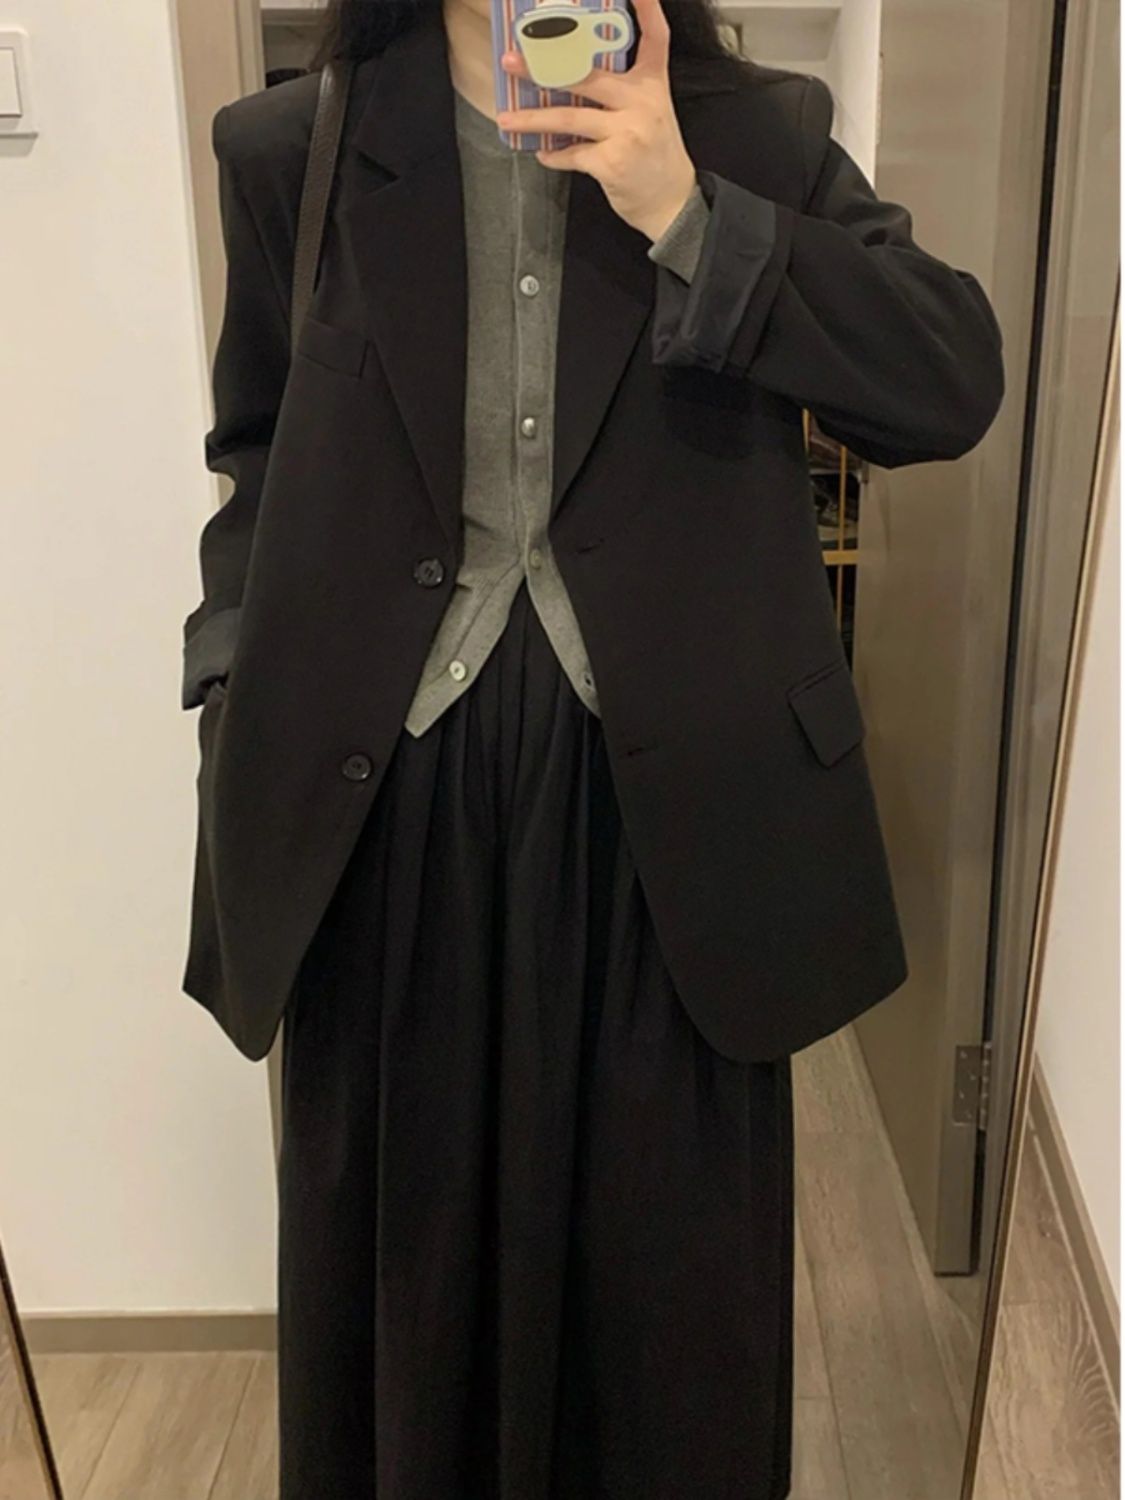 Black suit jacket for women, Korean spring and autumn style, slim, casual, single-breasted, casual, versatile, internet celebrity, trendy street suit